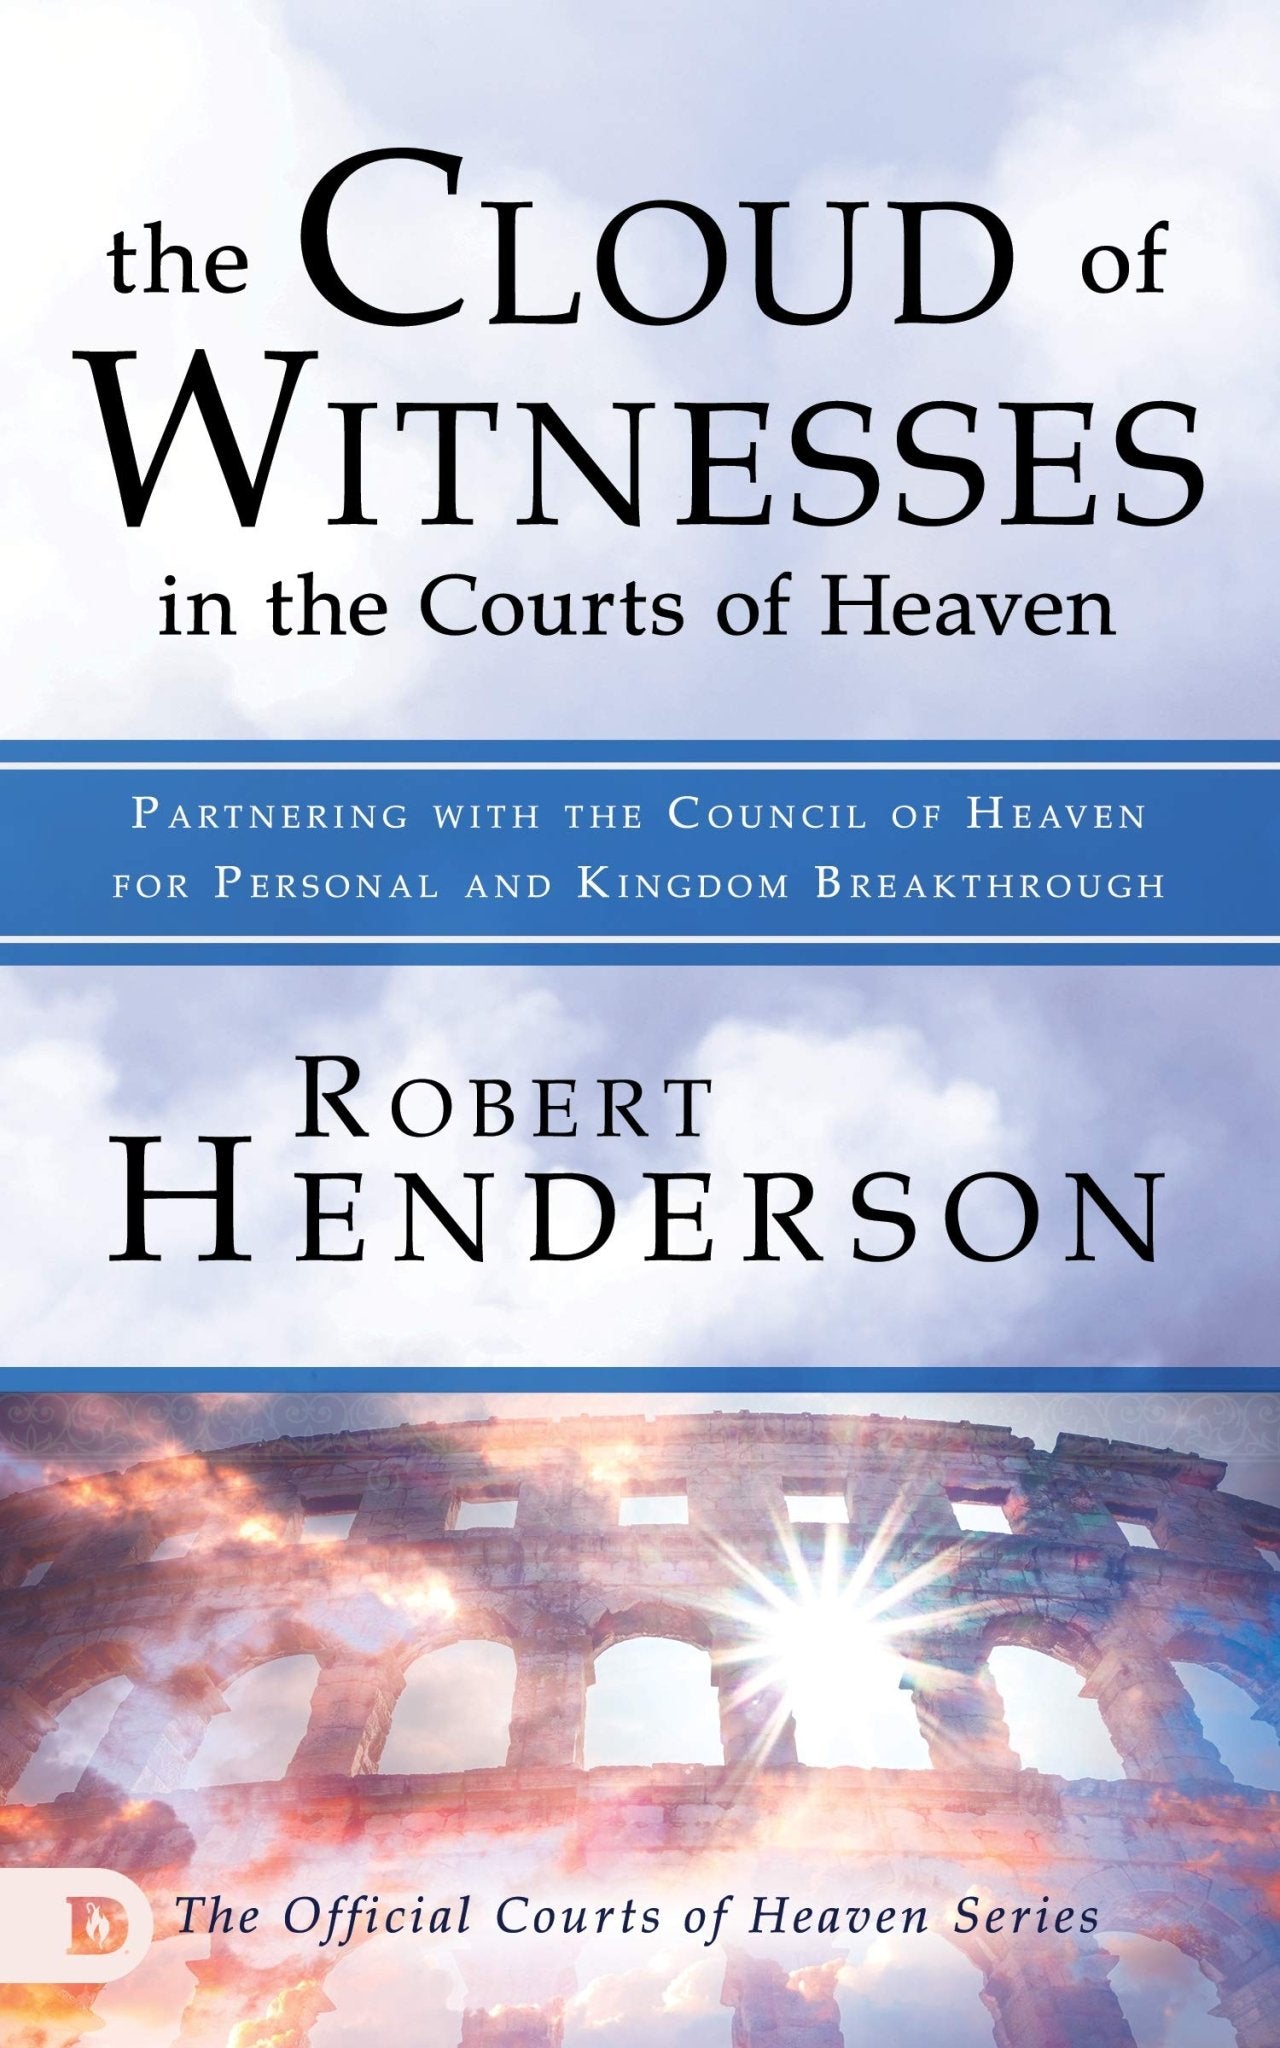 The Cloud of Witnesses in the Courts of Heaven: Partnering with the Council of Heaven for Personal and Kingdom Breakthrough (Paperback)